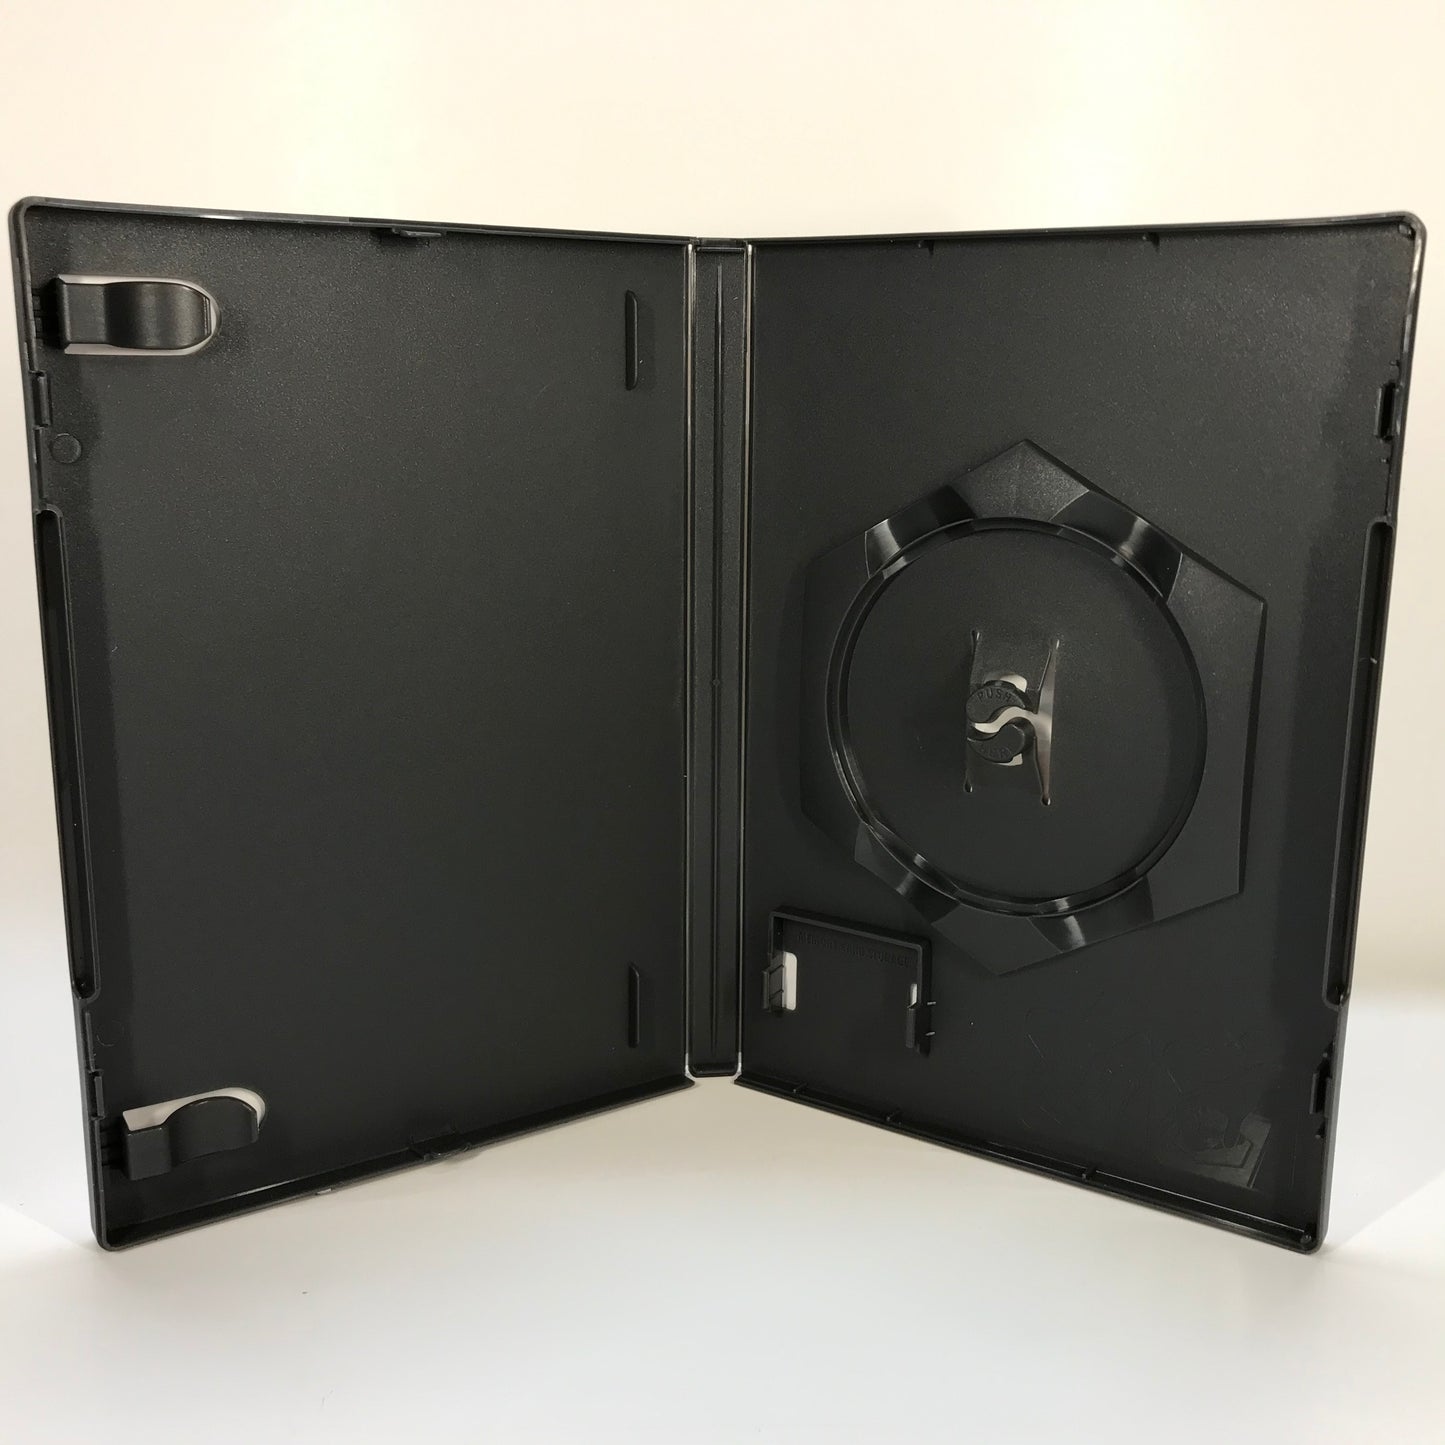 GameCube Replacement Case - NO GAME - Midway Arcade Treasures 1